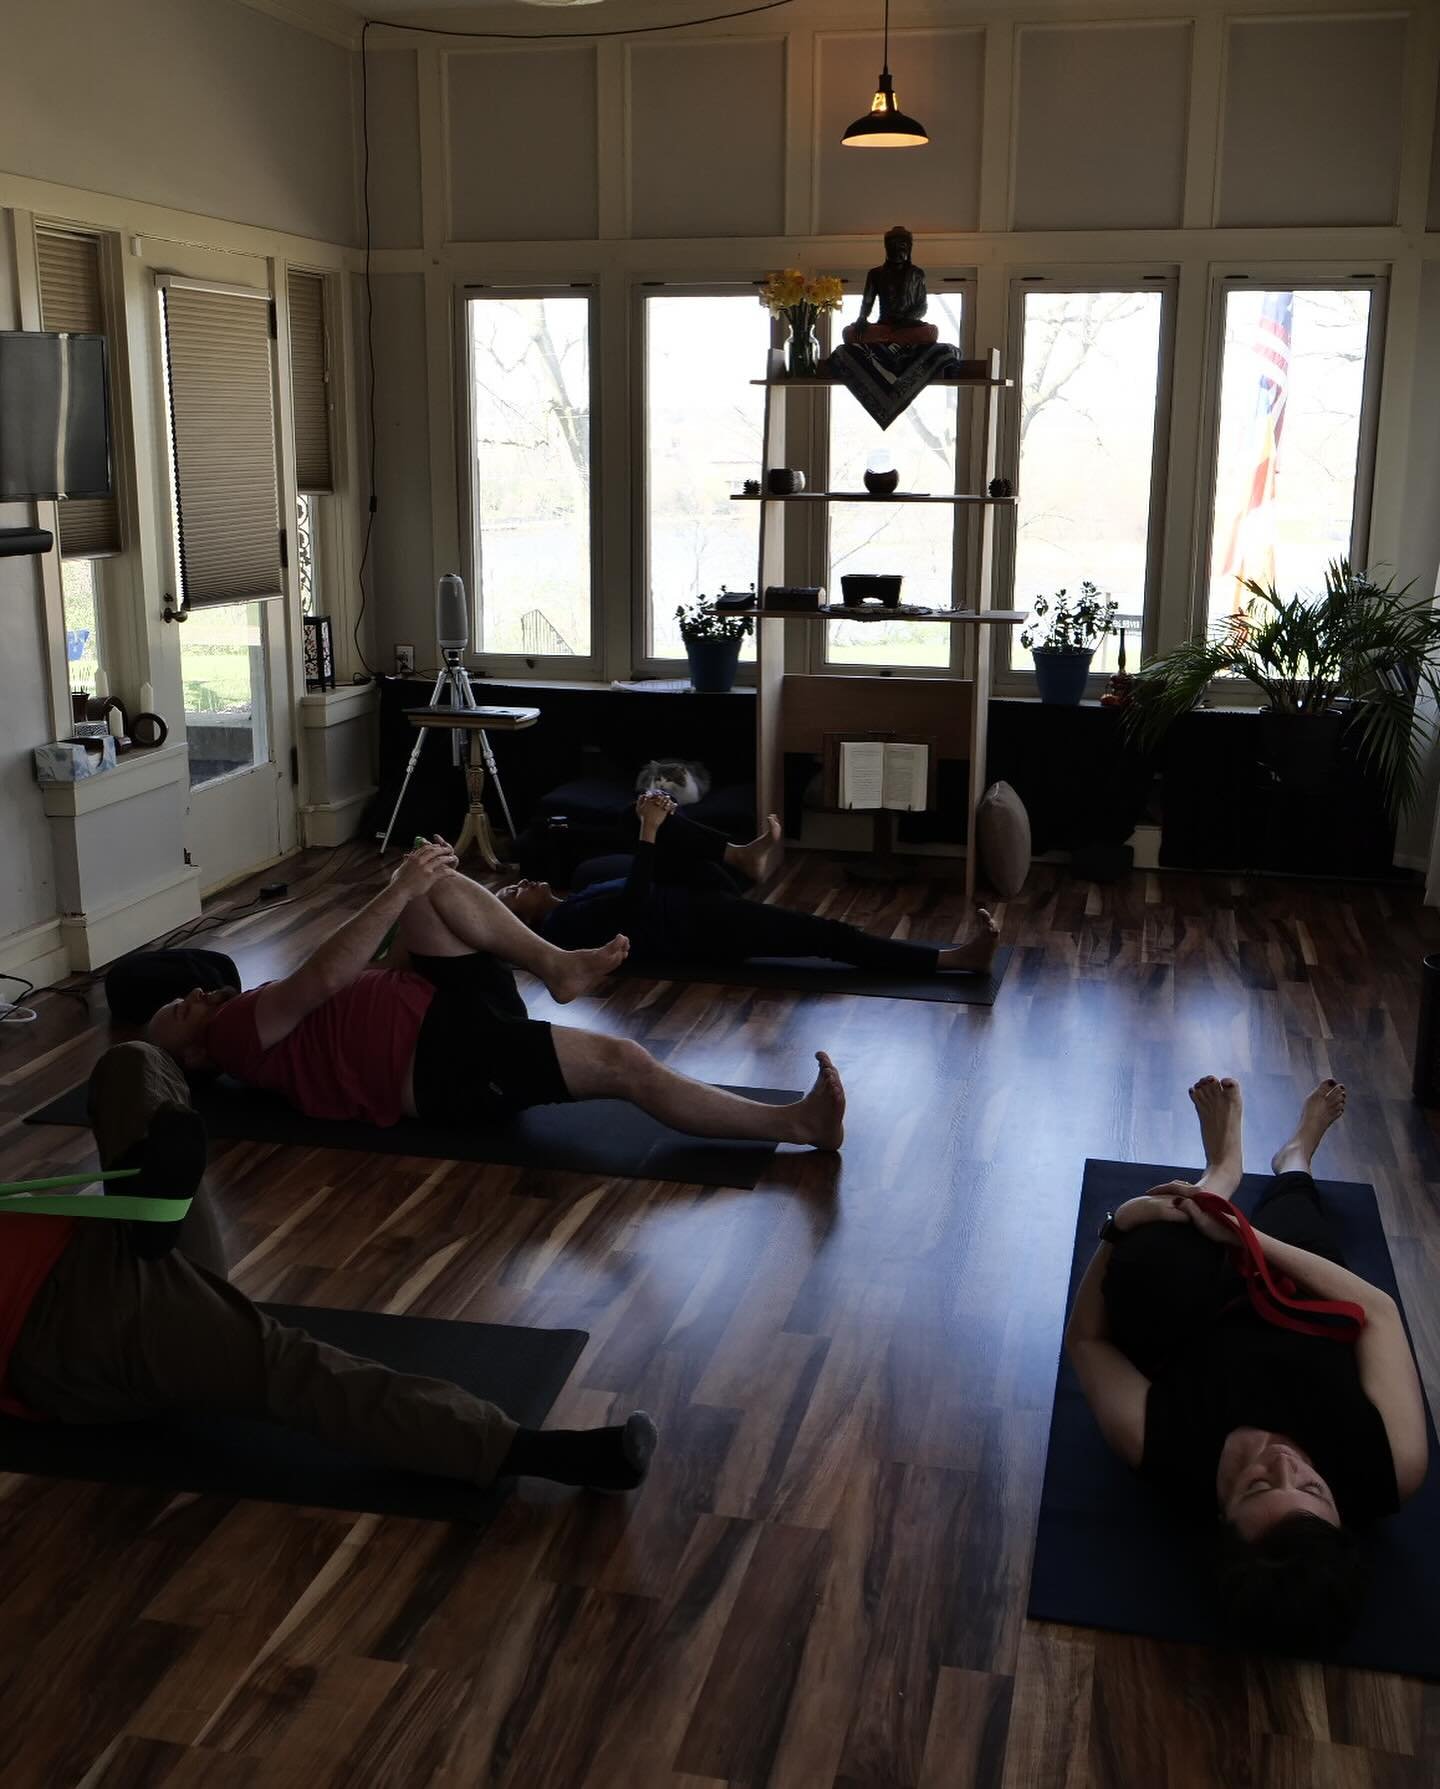 We do more than meditation during retreat! Here Kyōkan Vanessa leads the group in a relaxing yoga session. #zen #yoga #zenyoga #buddhist #pickusottawail